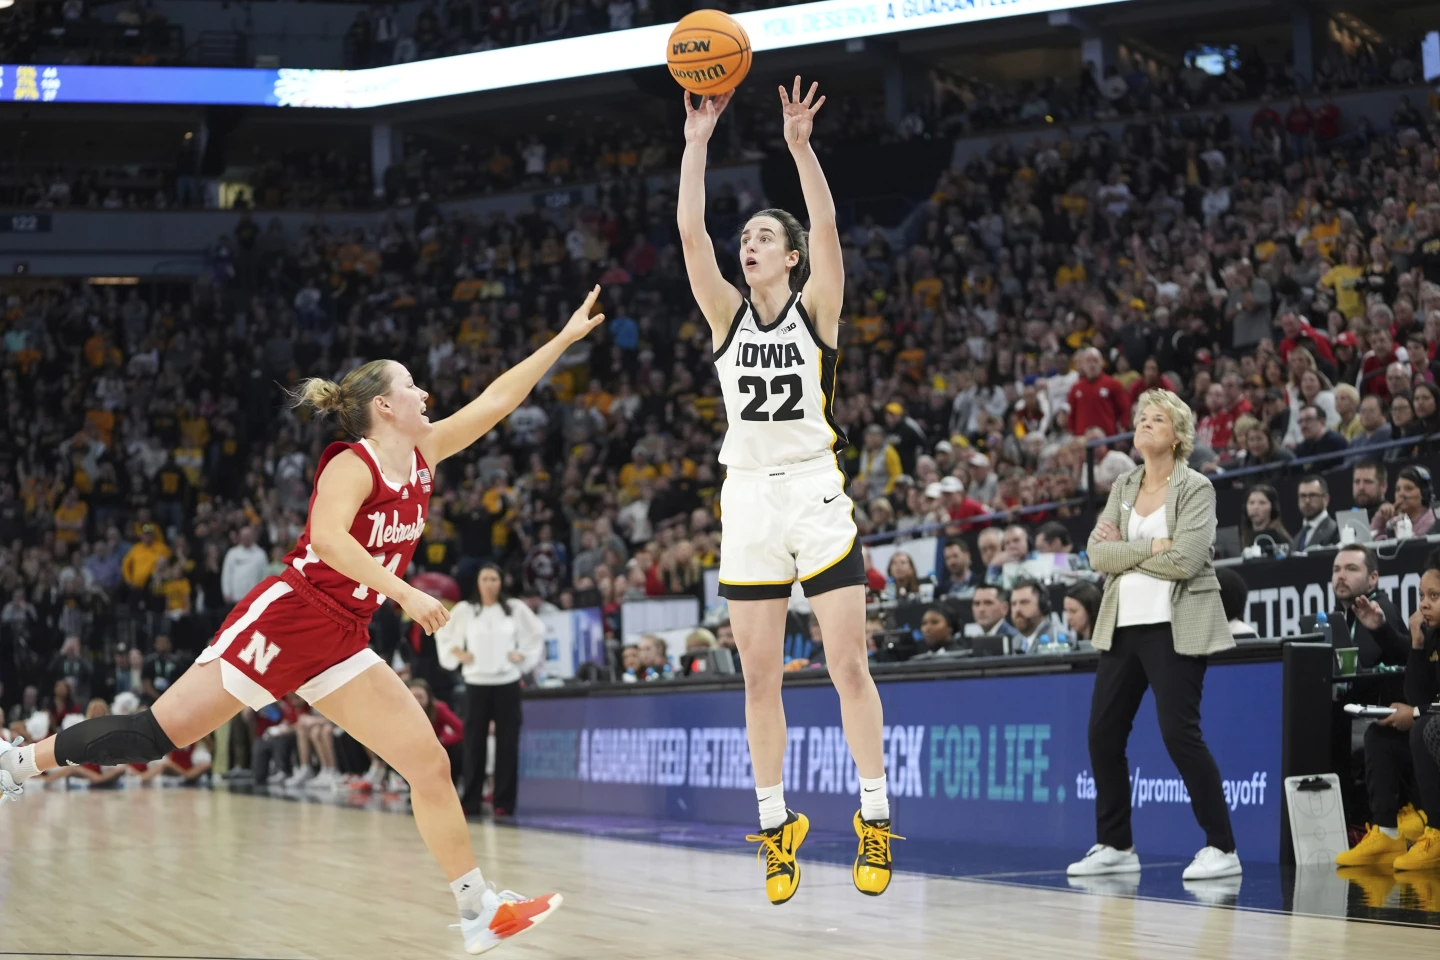 Clark, Iowa claim another record with most-viewed first-round game in women’s NCAA tourney history